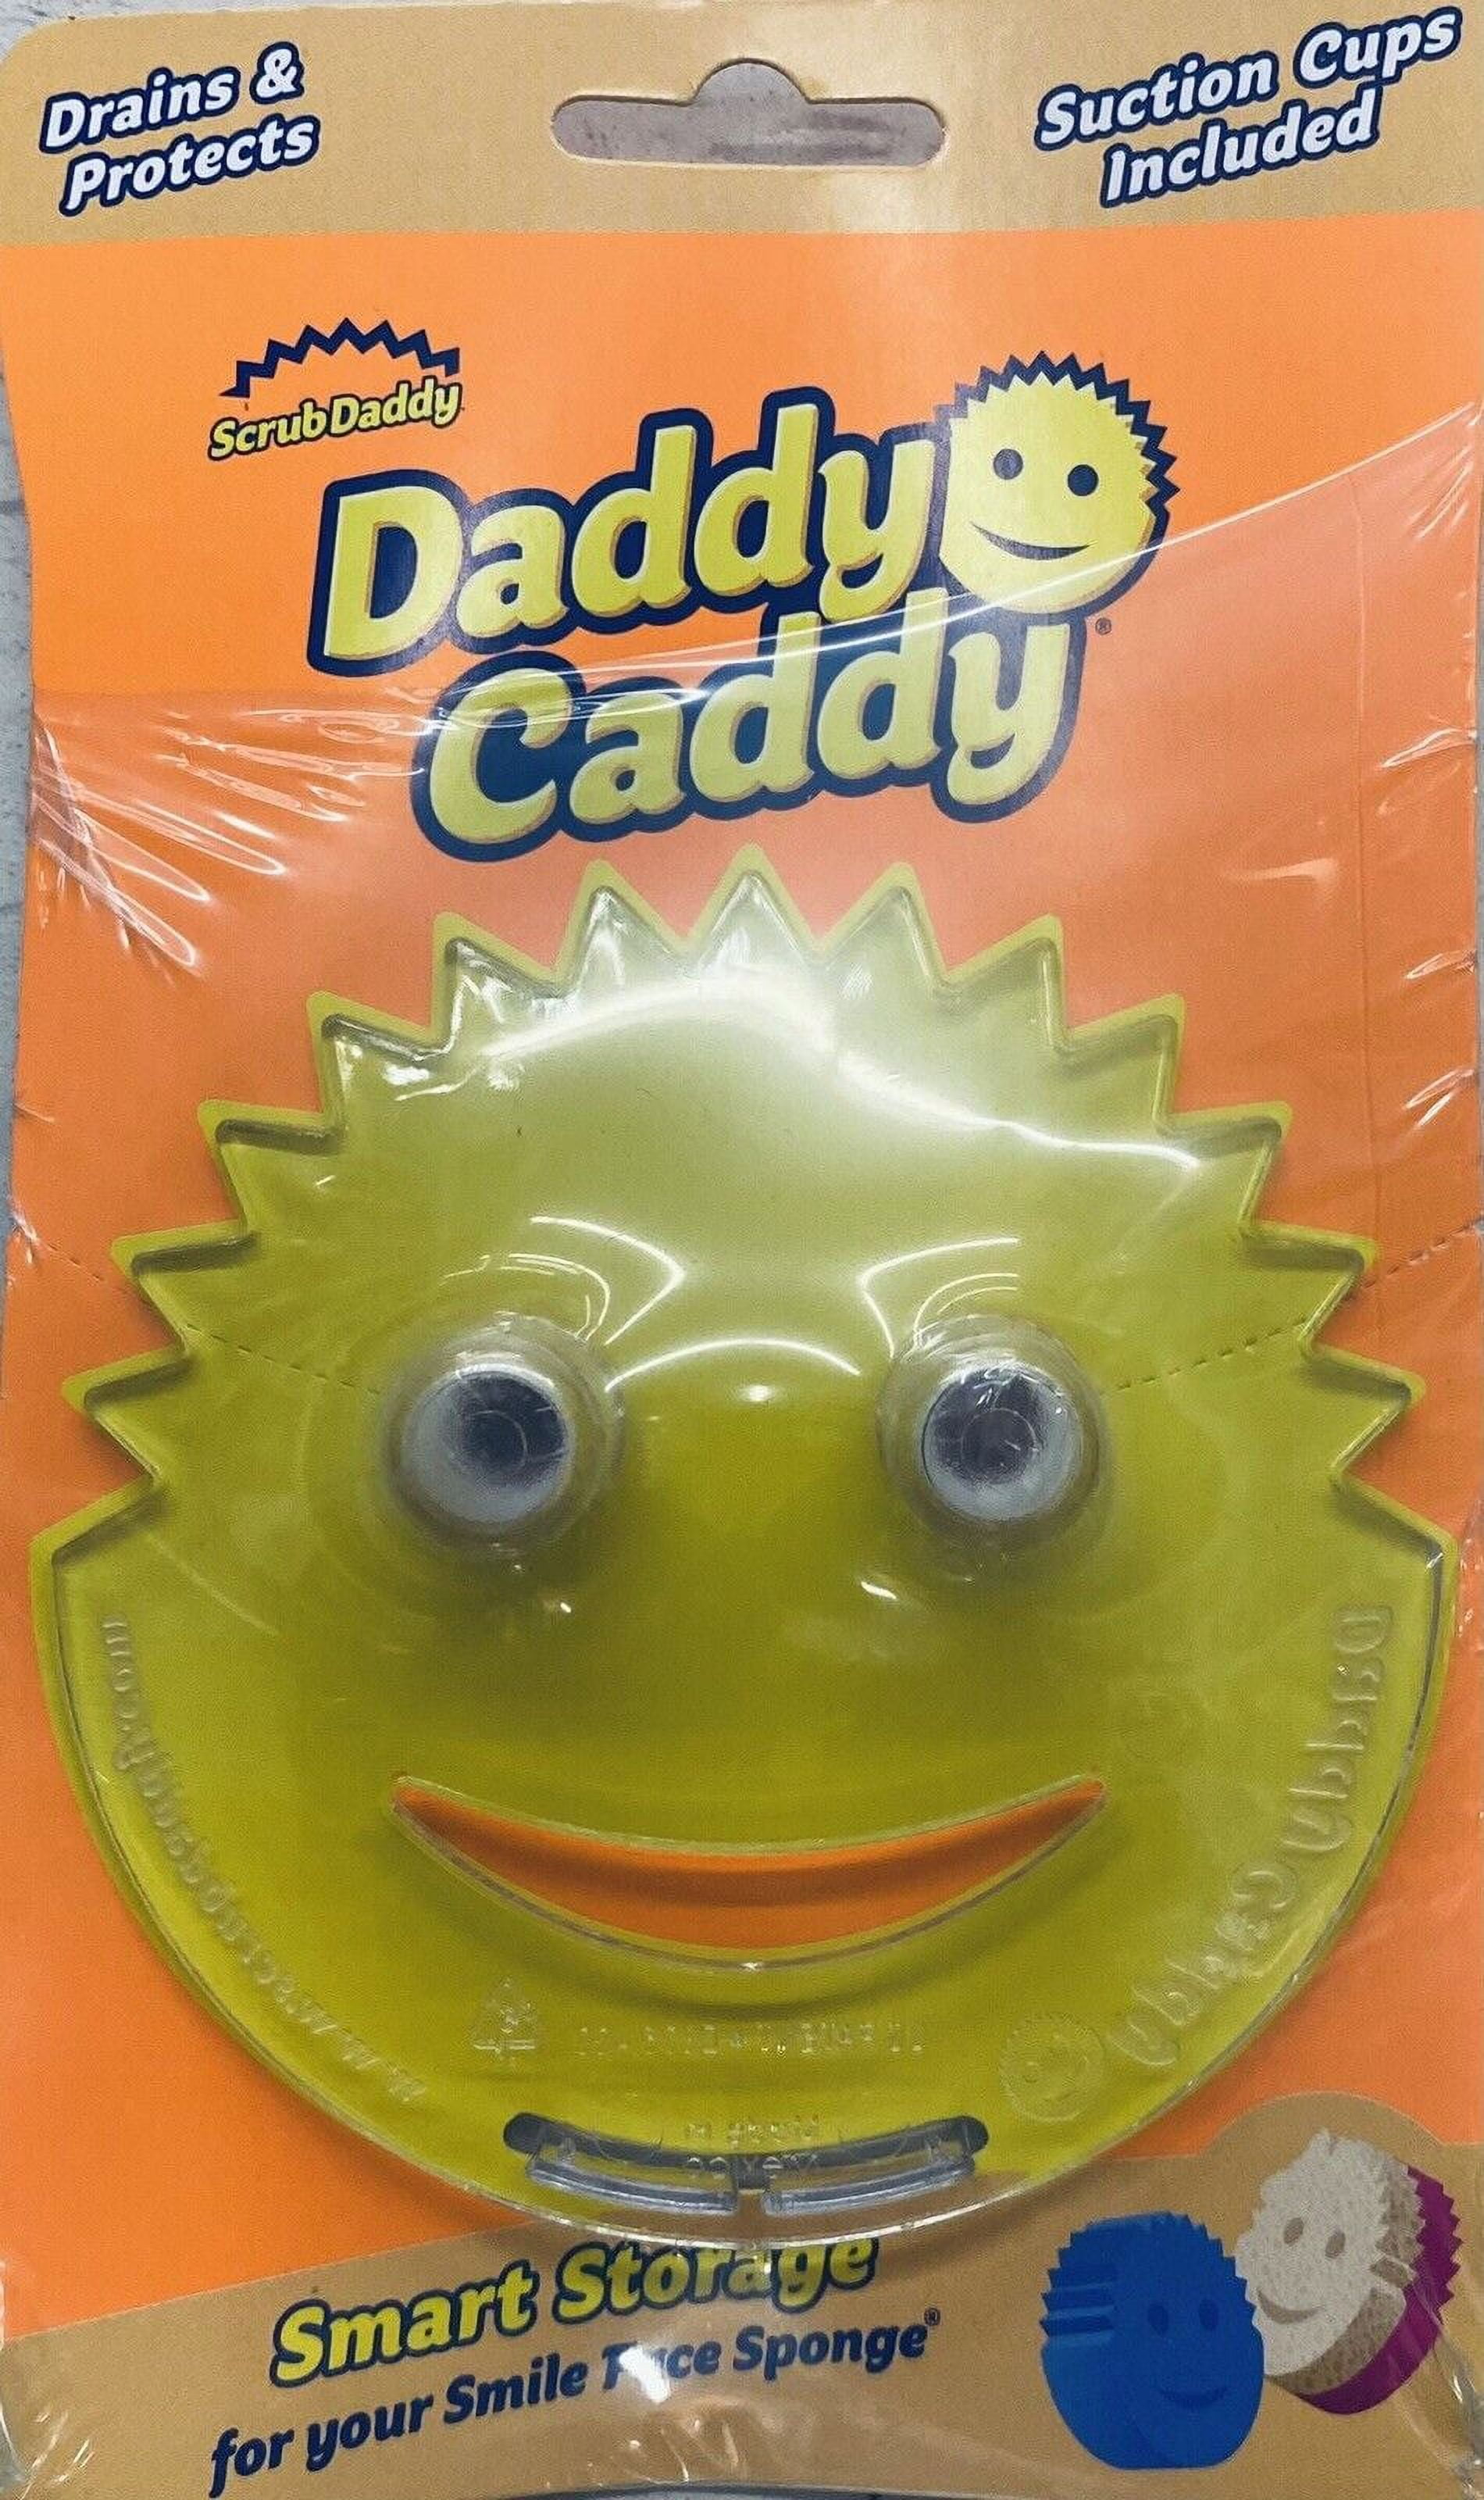 If you have a Scrub Daddy, then you need a Daddy Caddy - the sleek storage  solution for your smiley face sponge.